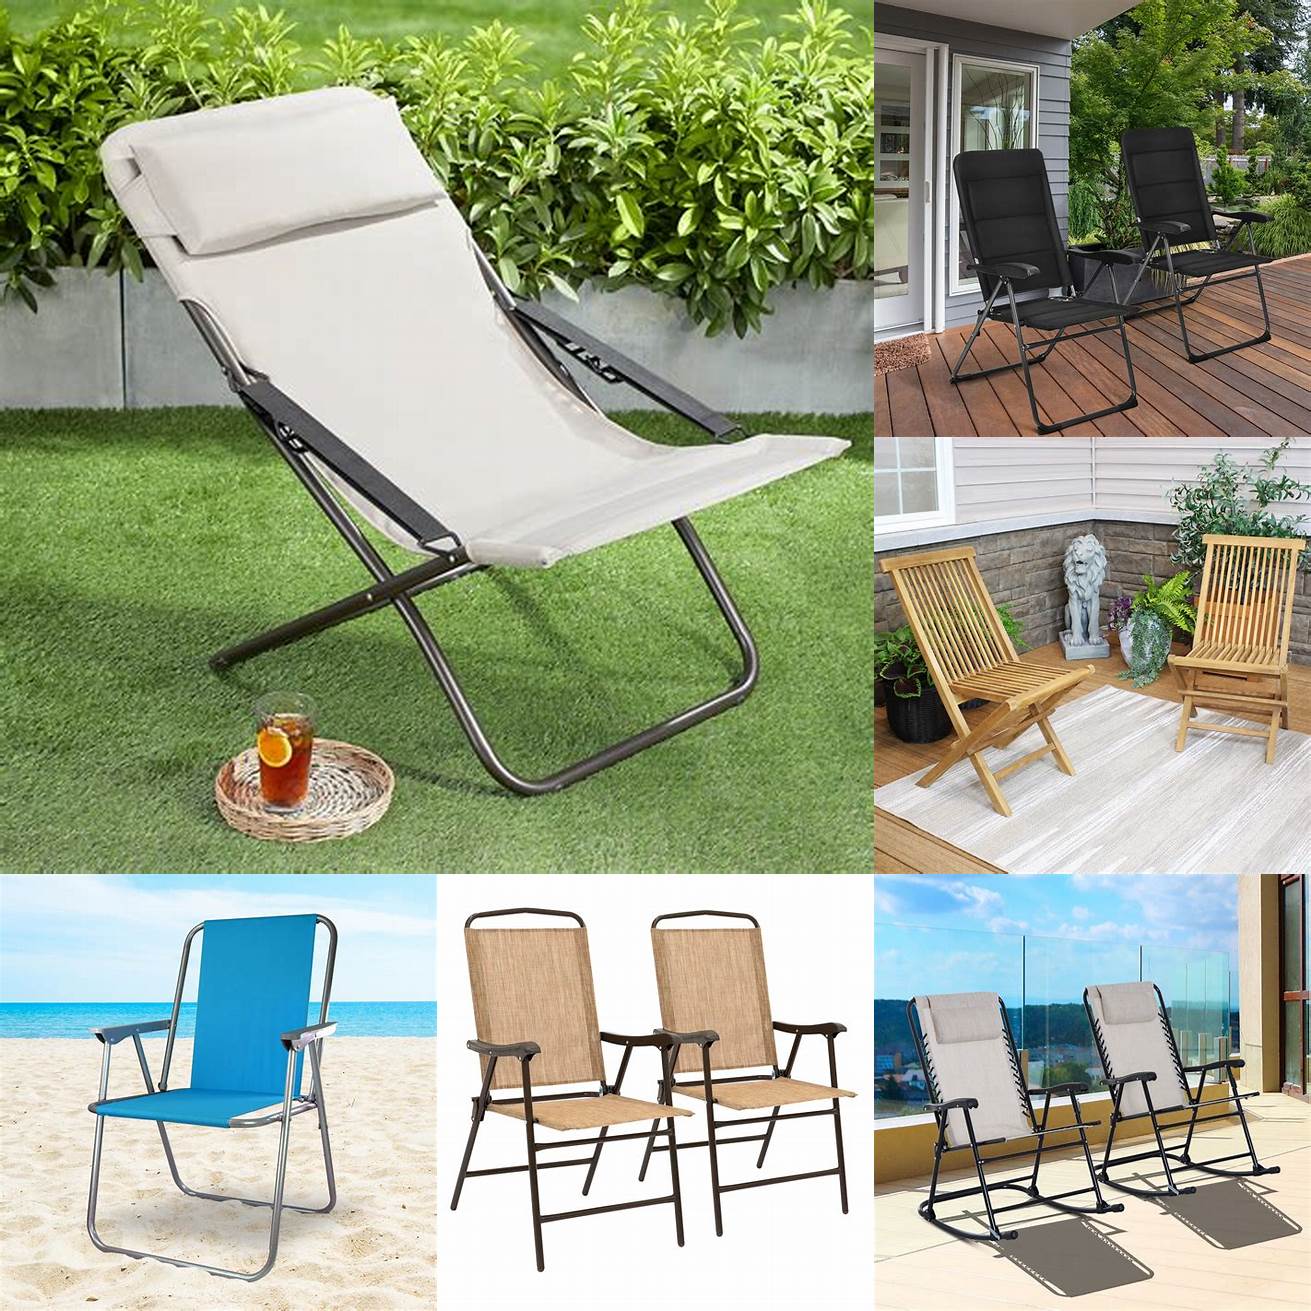 Folding deck chairs